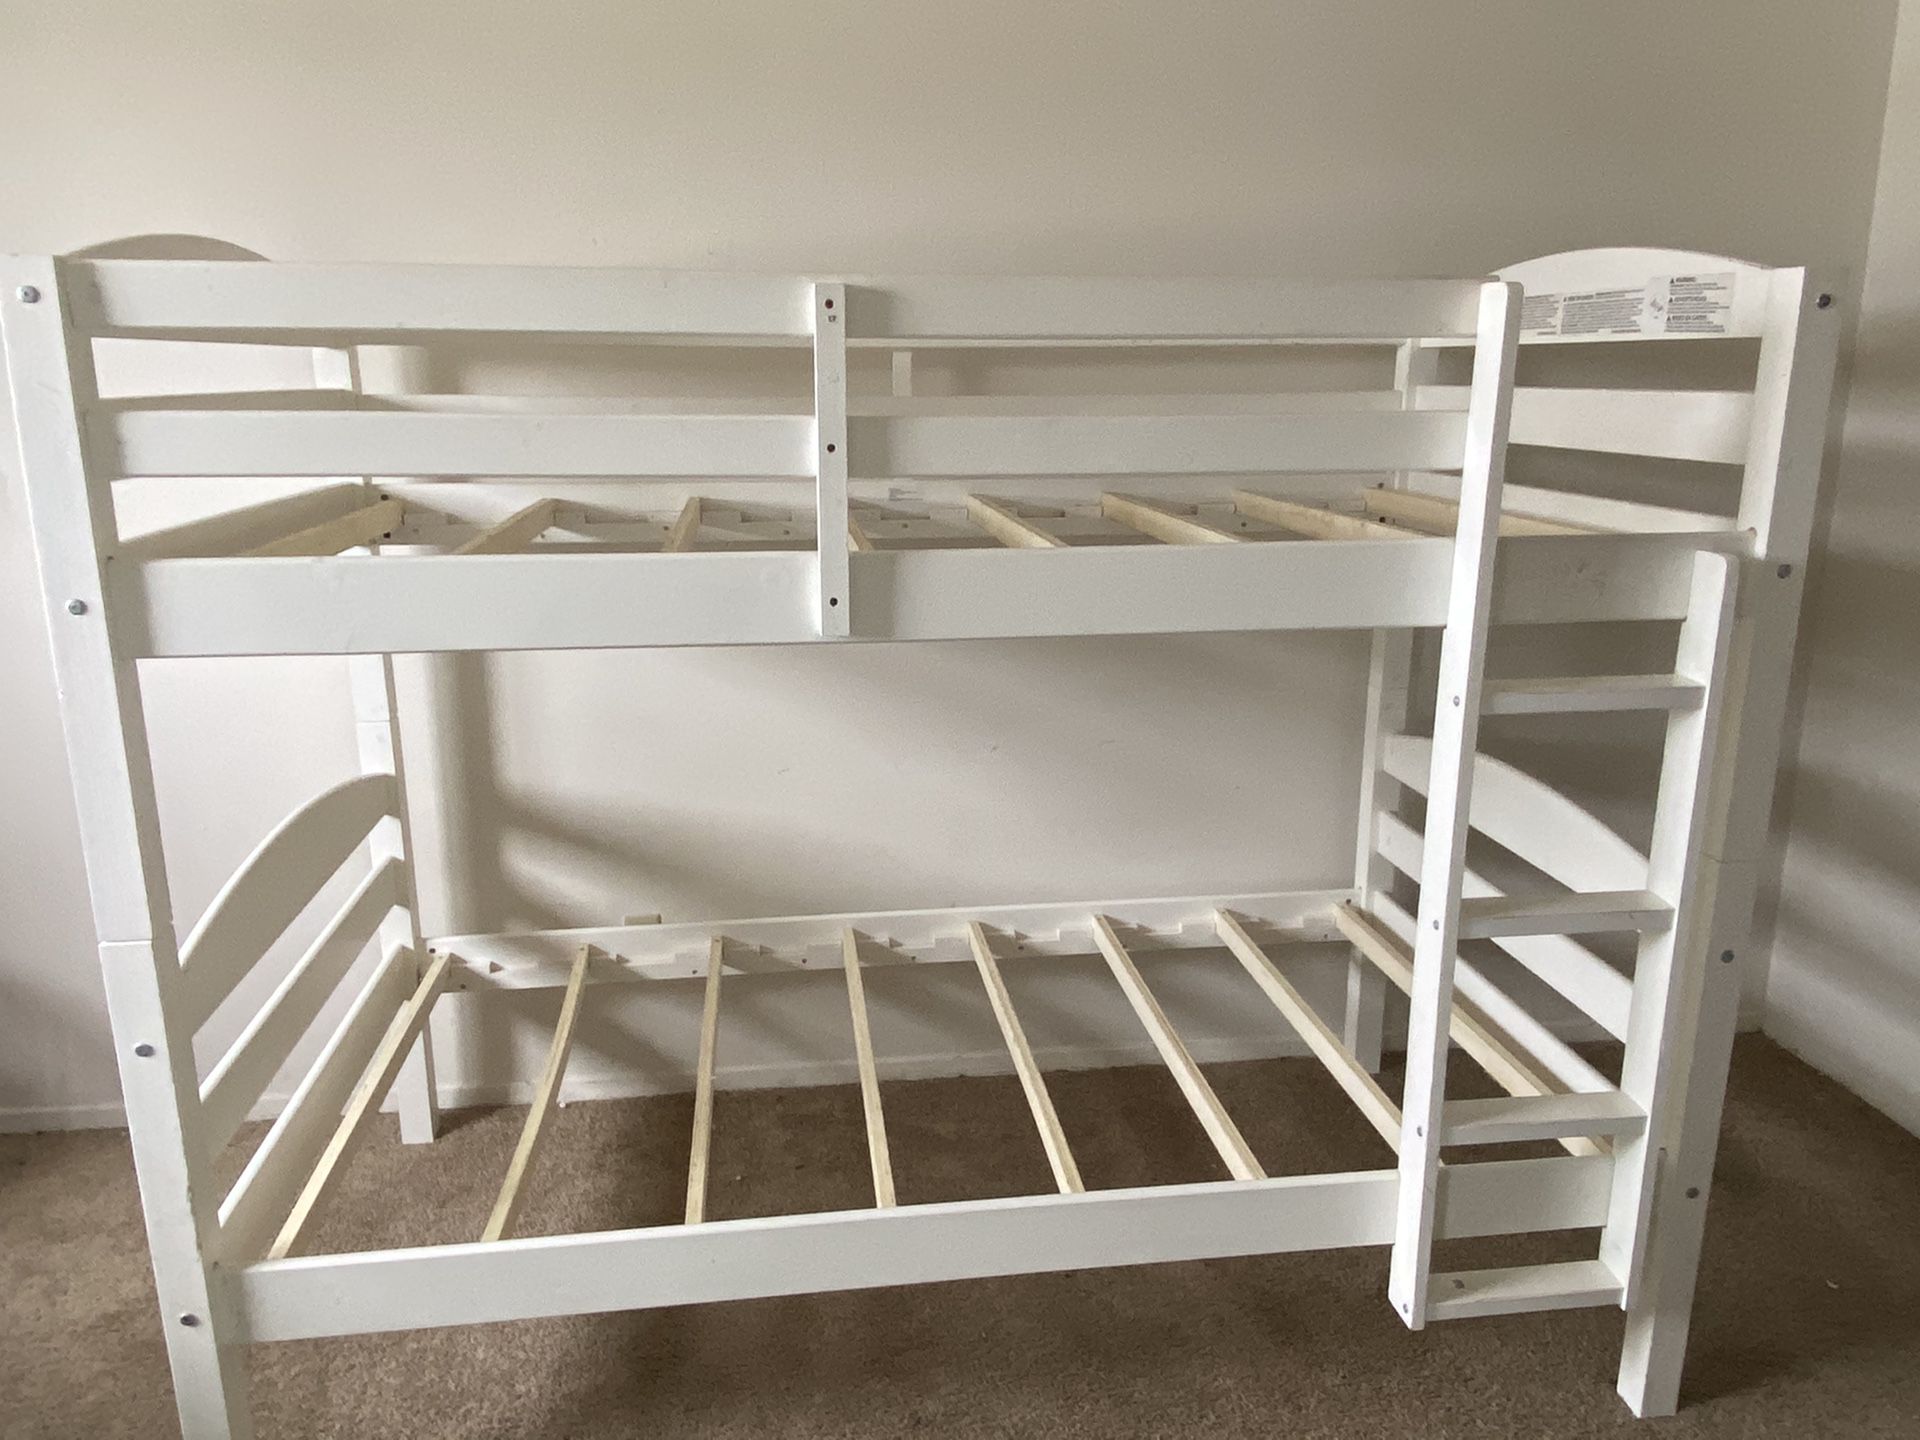 Children’s Bunk Bed (or twin beds)